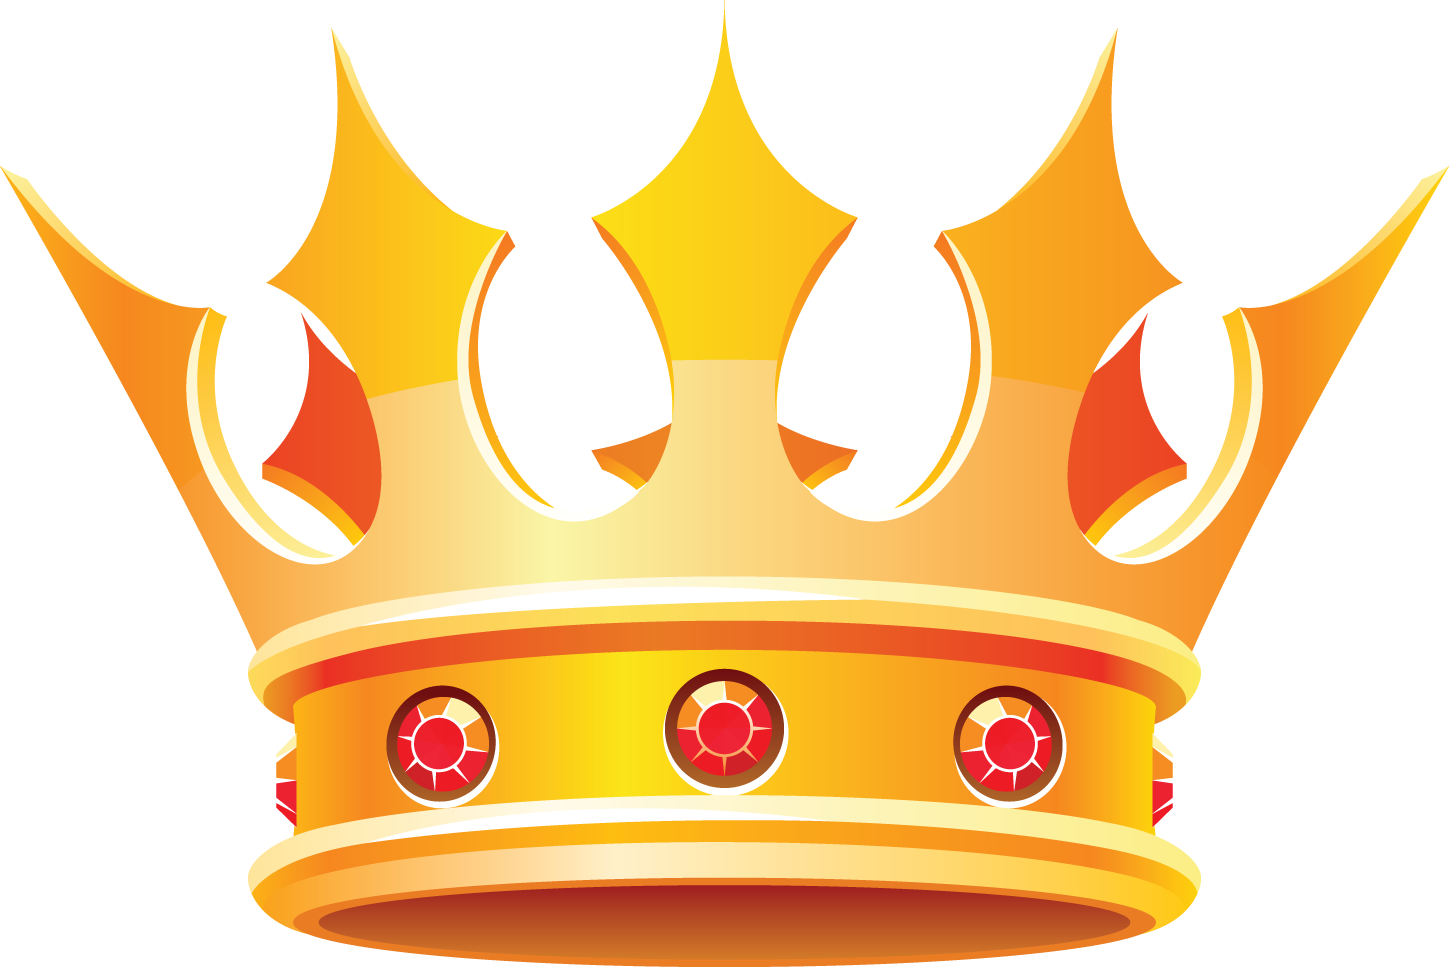 Yellow Crown - ClipArt Best